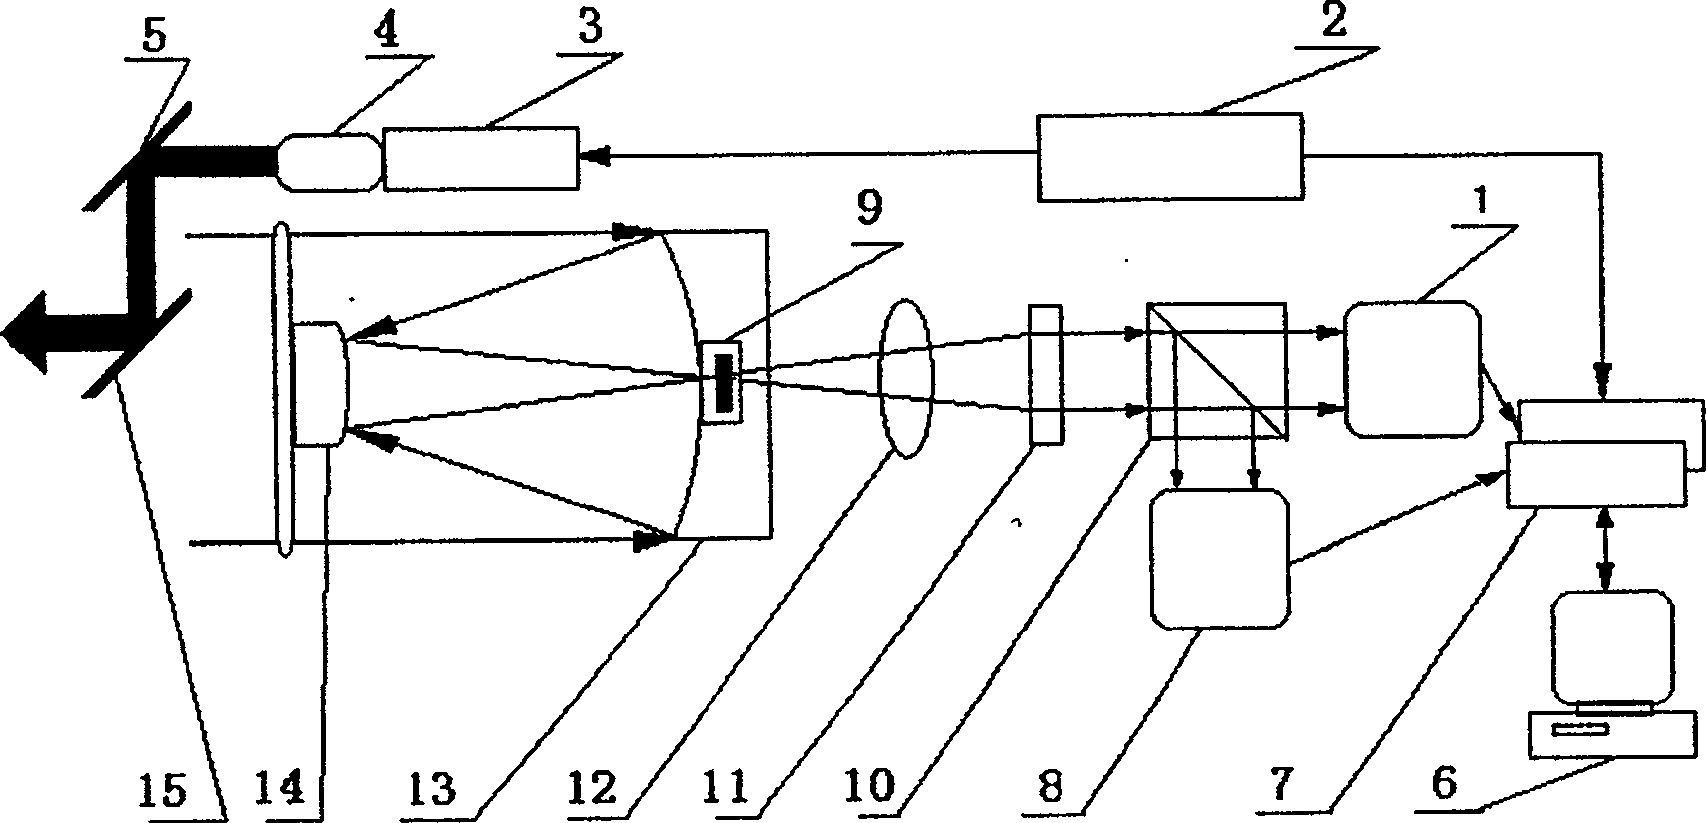 Mie scattering polarization micro-pulse laser radar control method and device